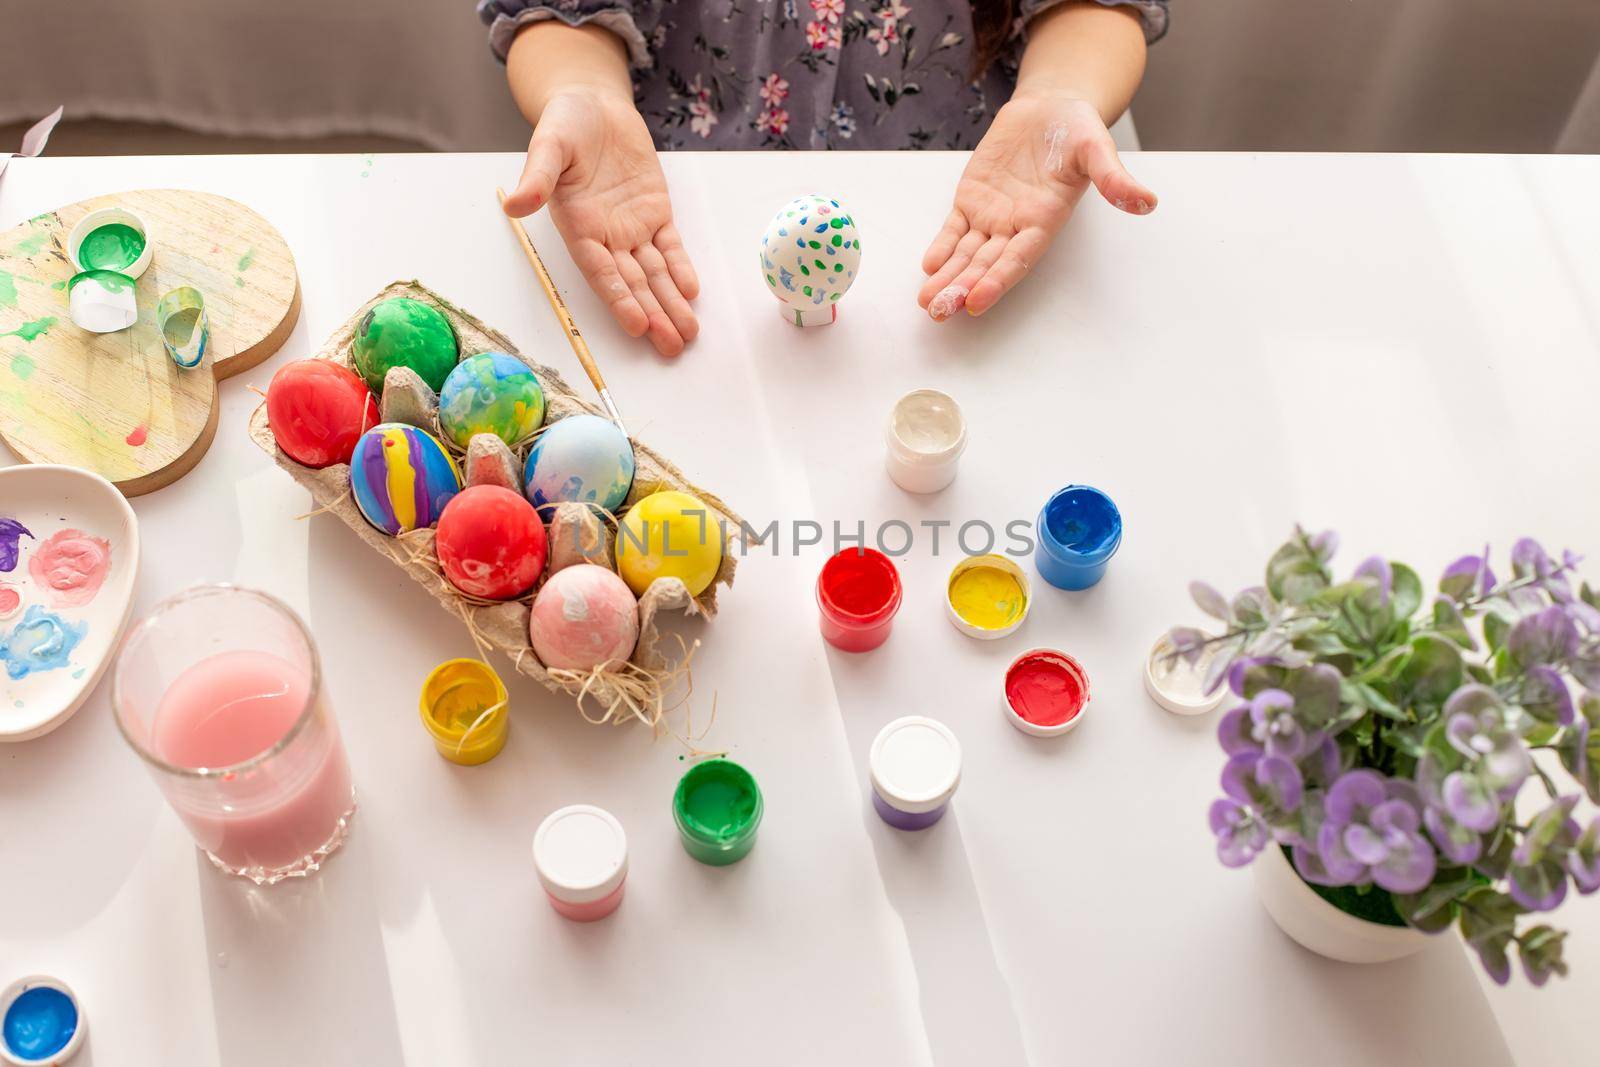 The hands of a little girl, palms up, demonstrate a painted egg, on a white table with multi-colored eggs in a tray, brushes and paints. Top view